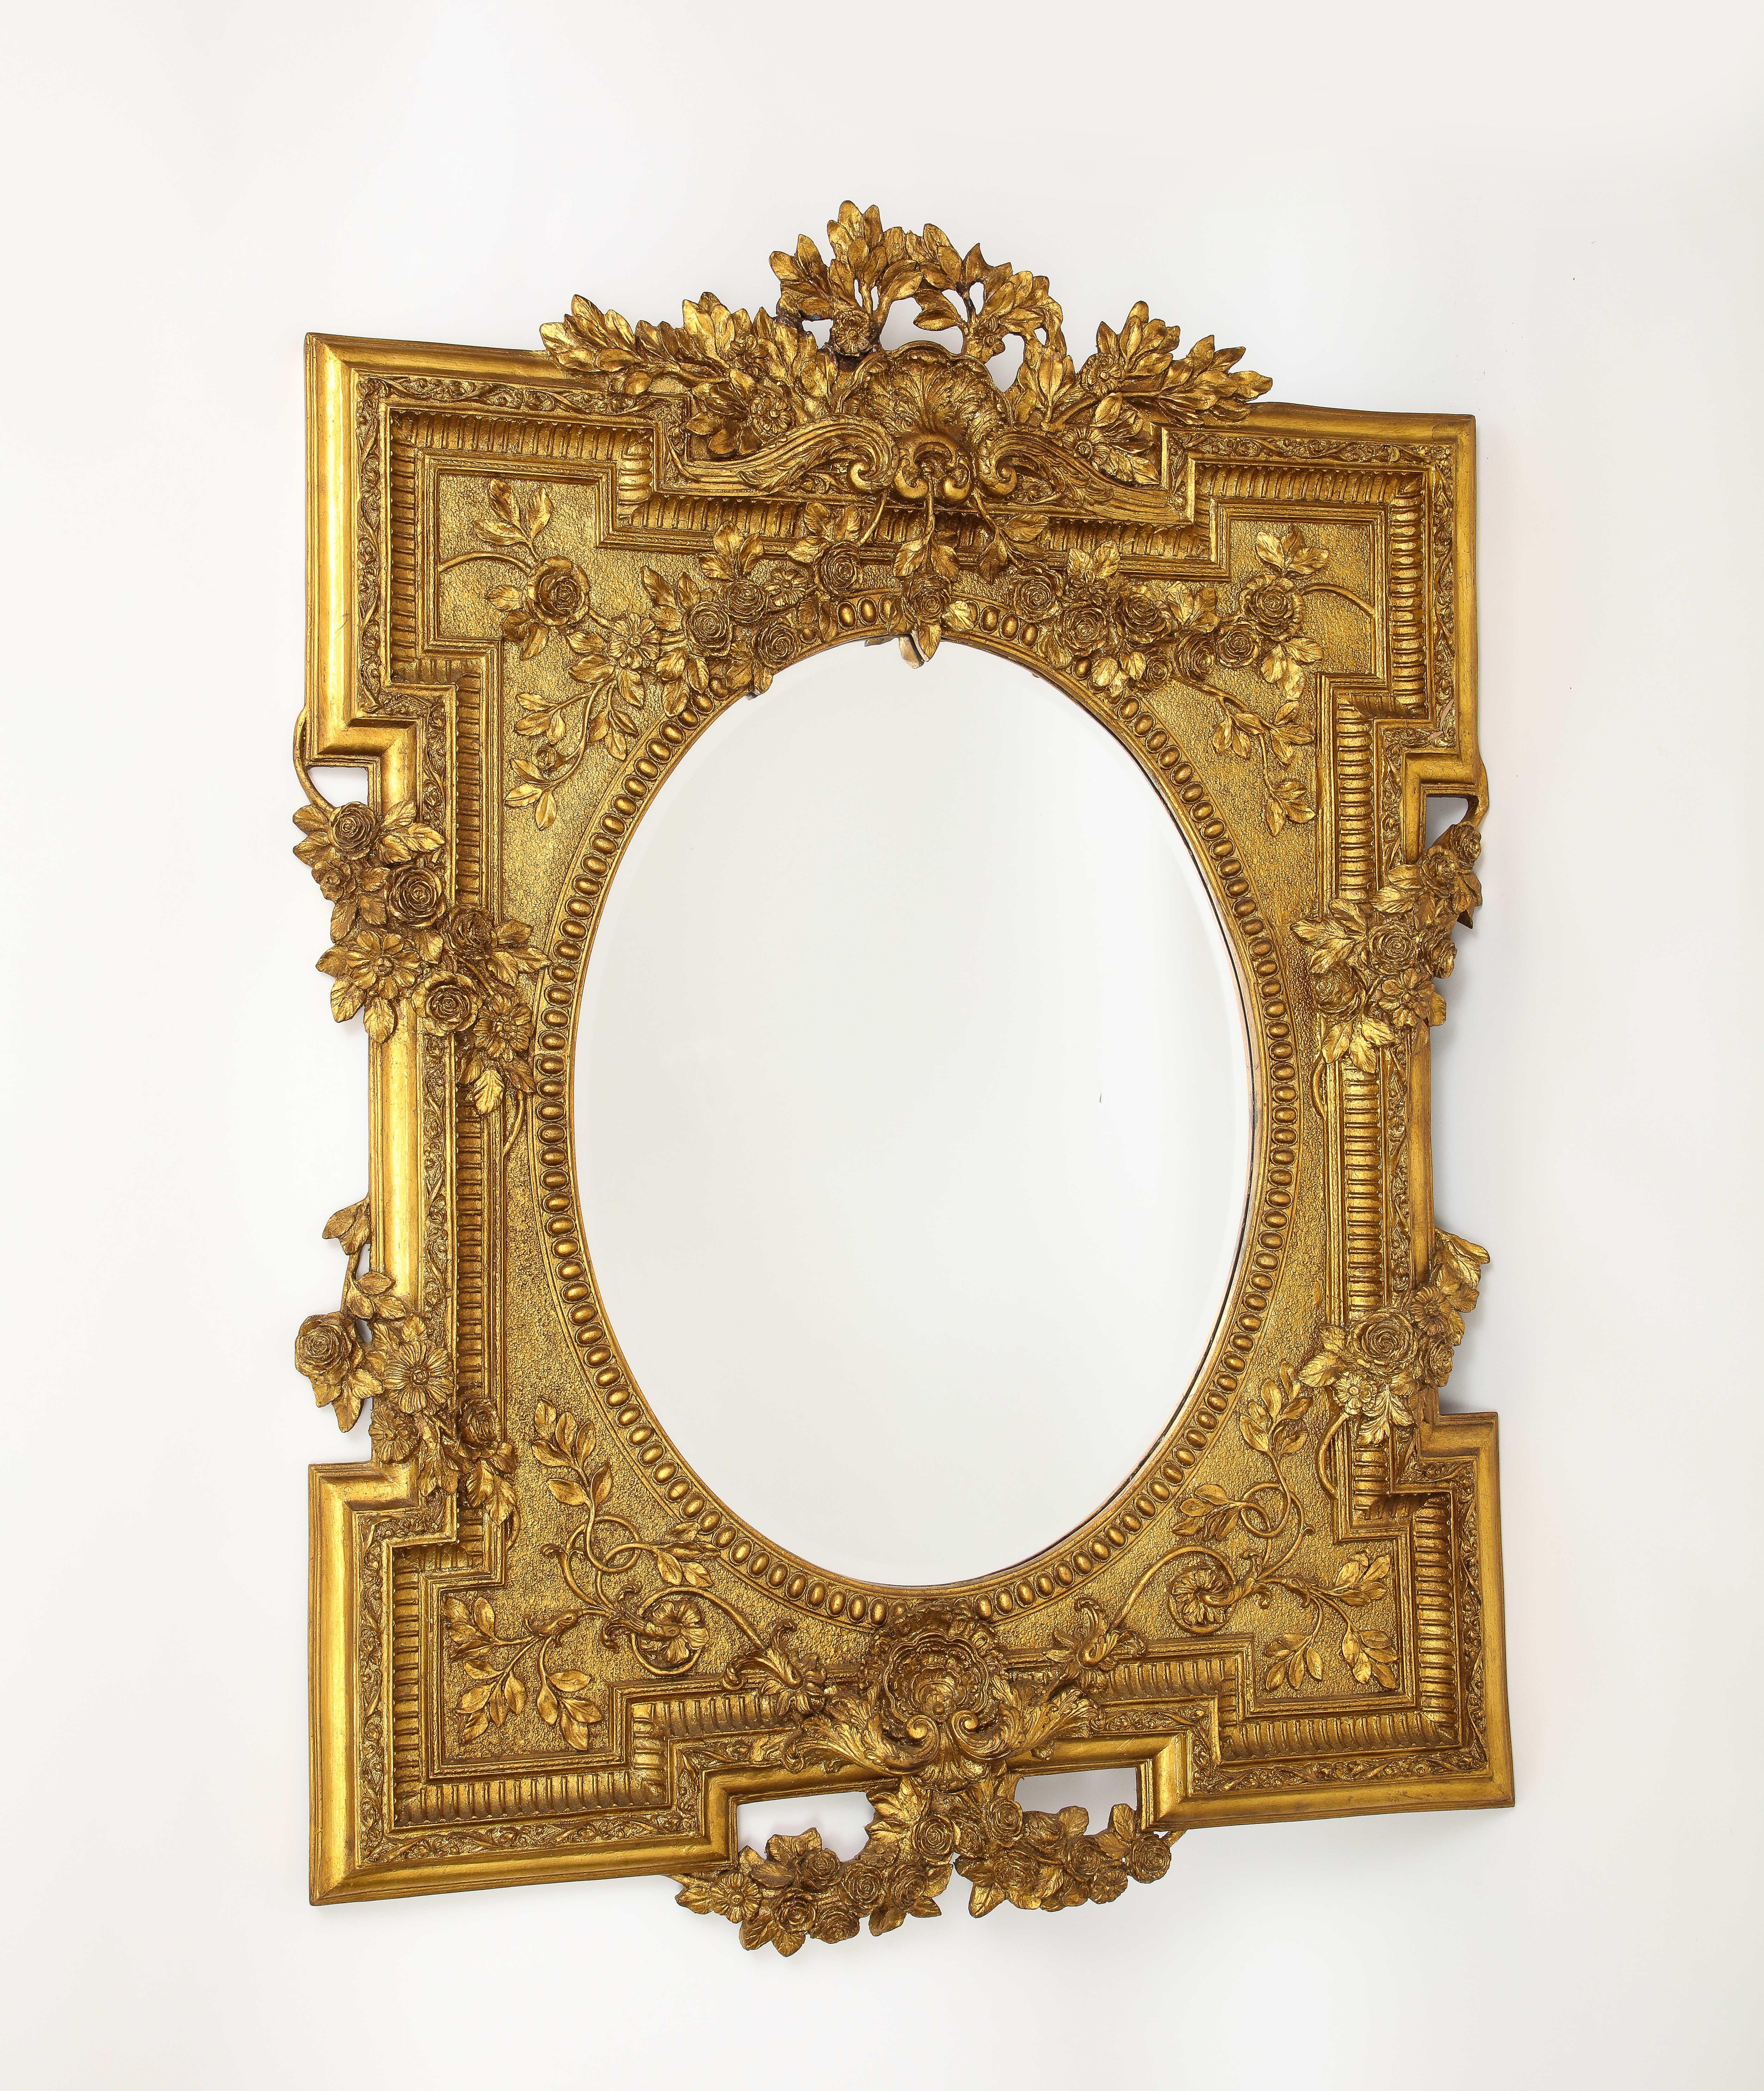 Louis XVI Marvelous French Giltwood Hand-Carved Beveled Mirror with Floral Vine Designs For Sale